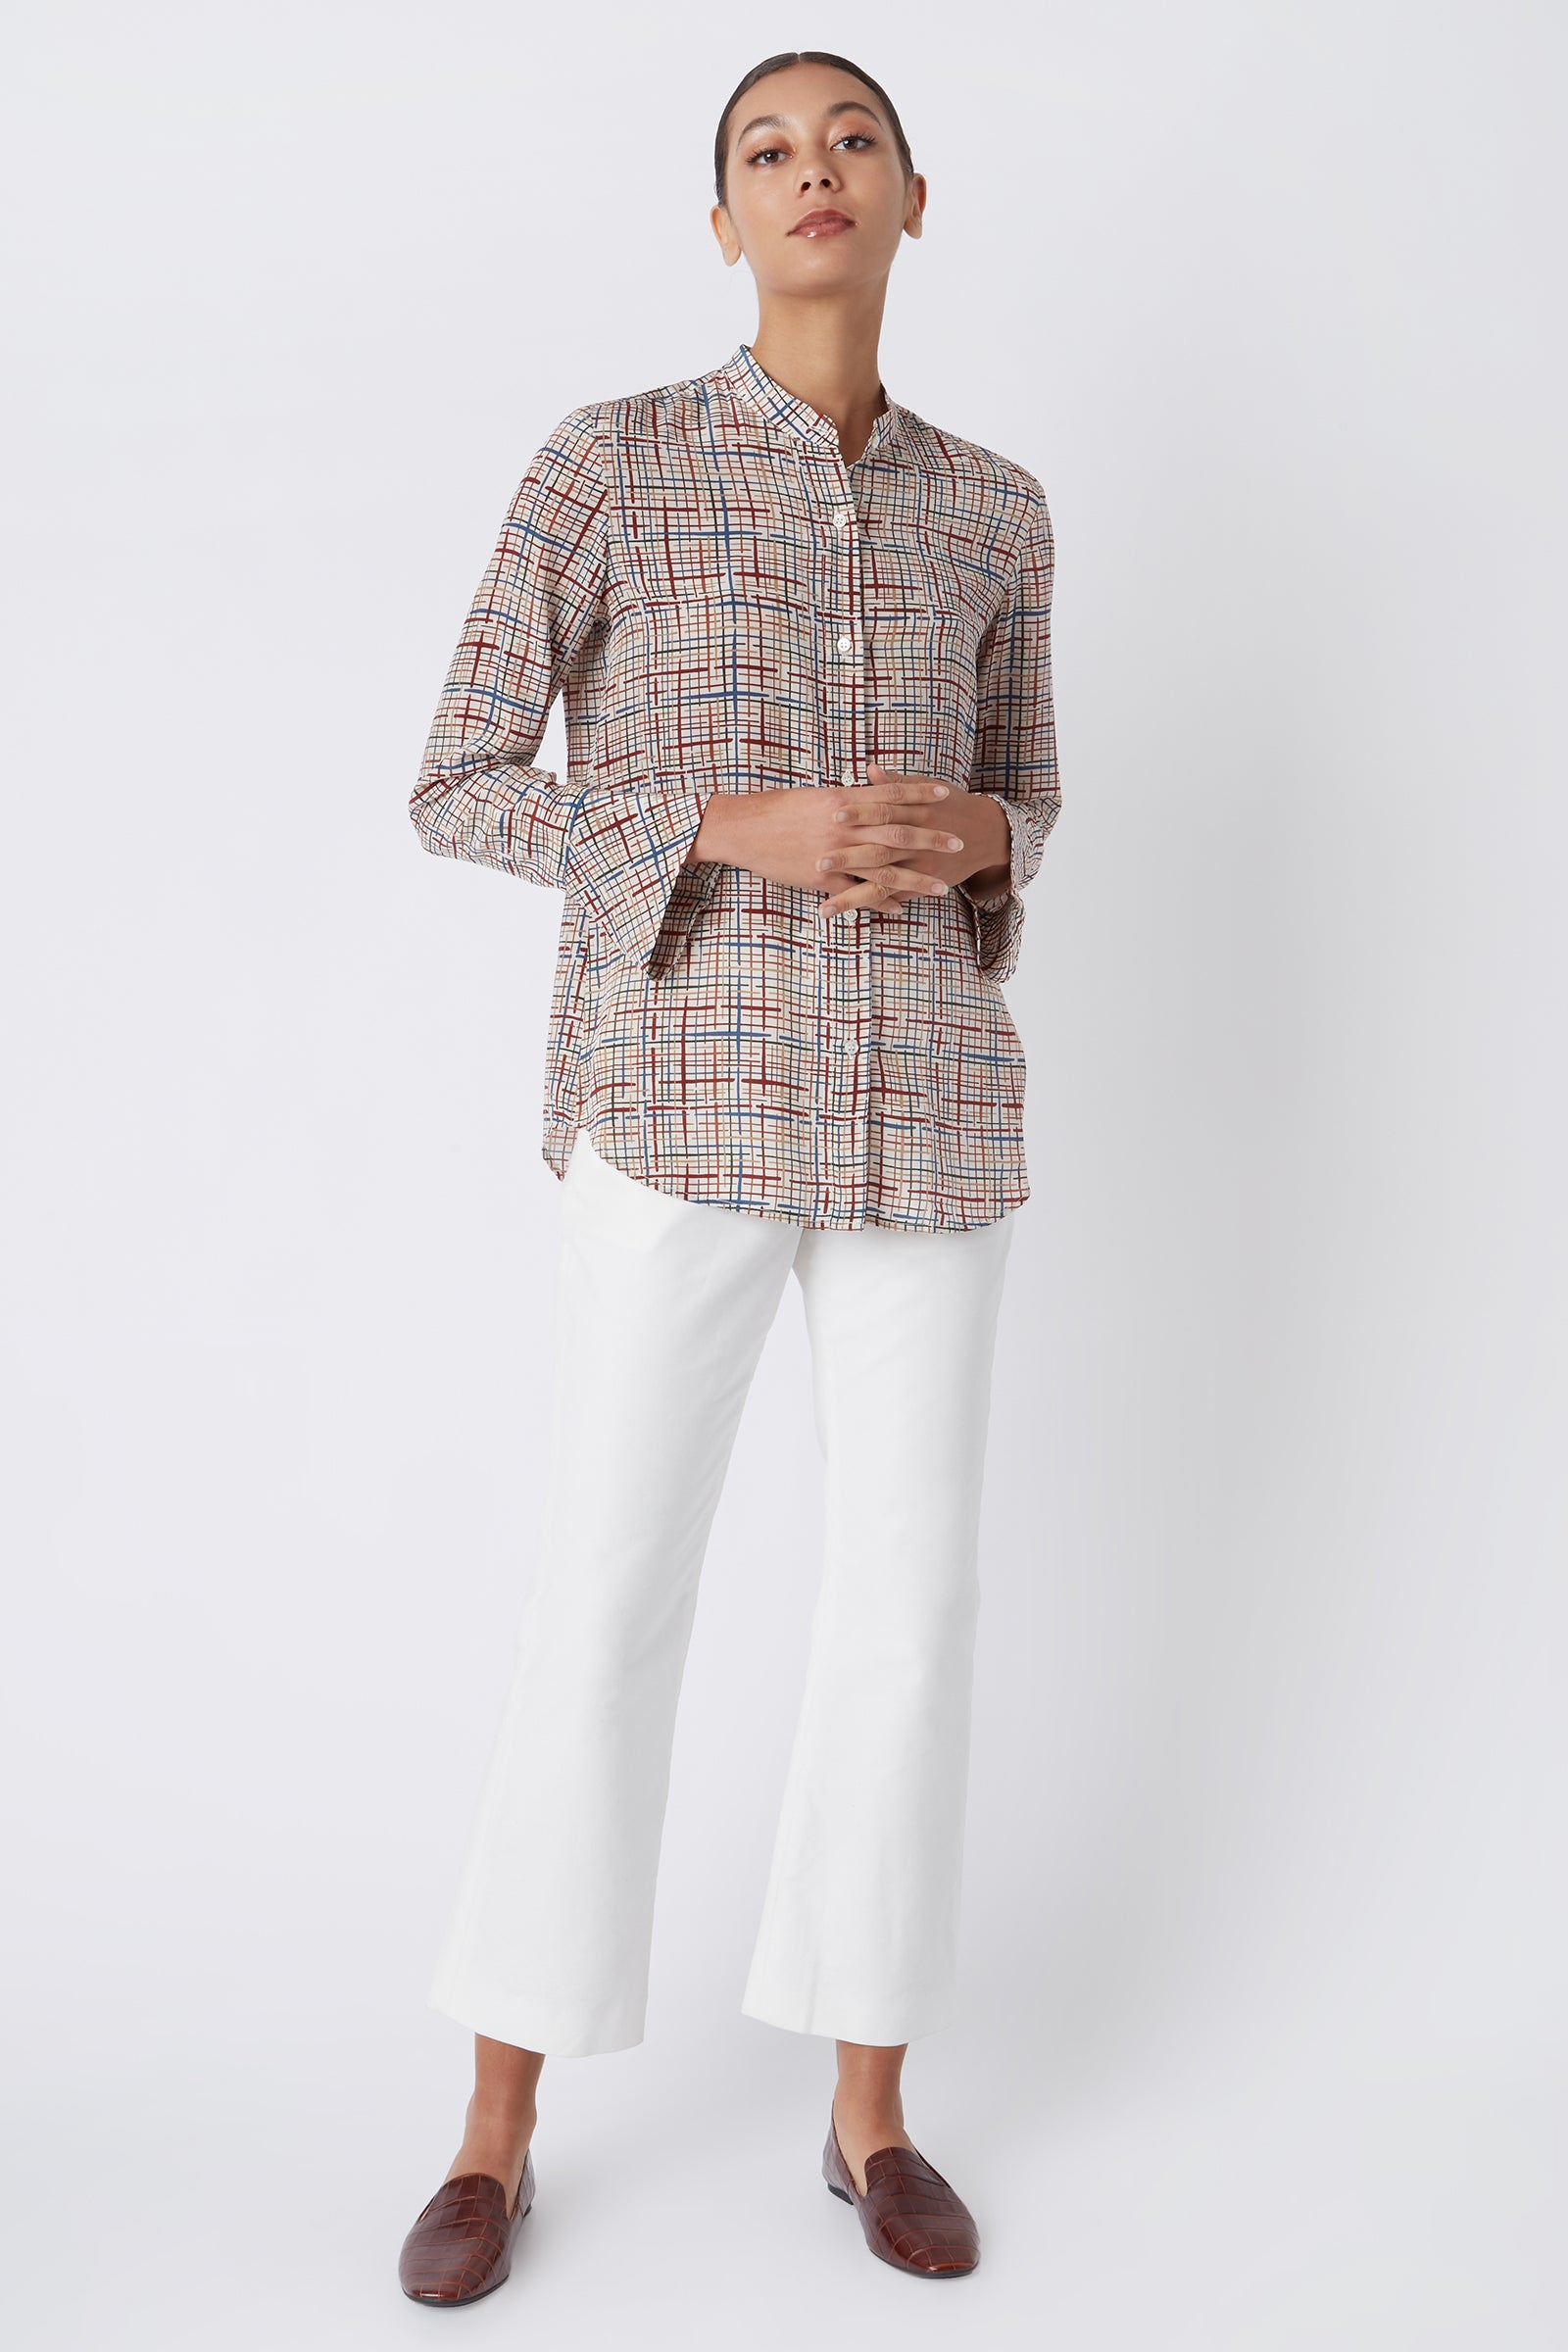 Kal Rieman Juliet Band Collar Blouse in Sketch Plaid on Model Looking Upwards Full Front View